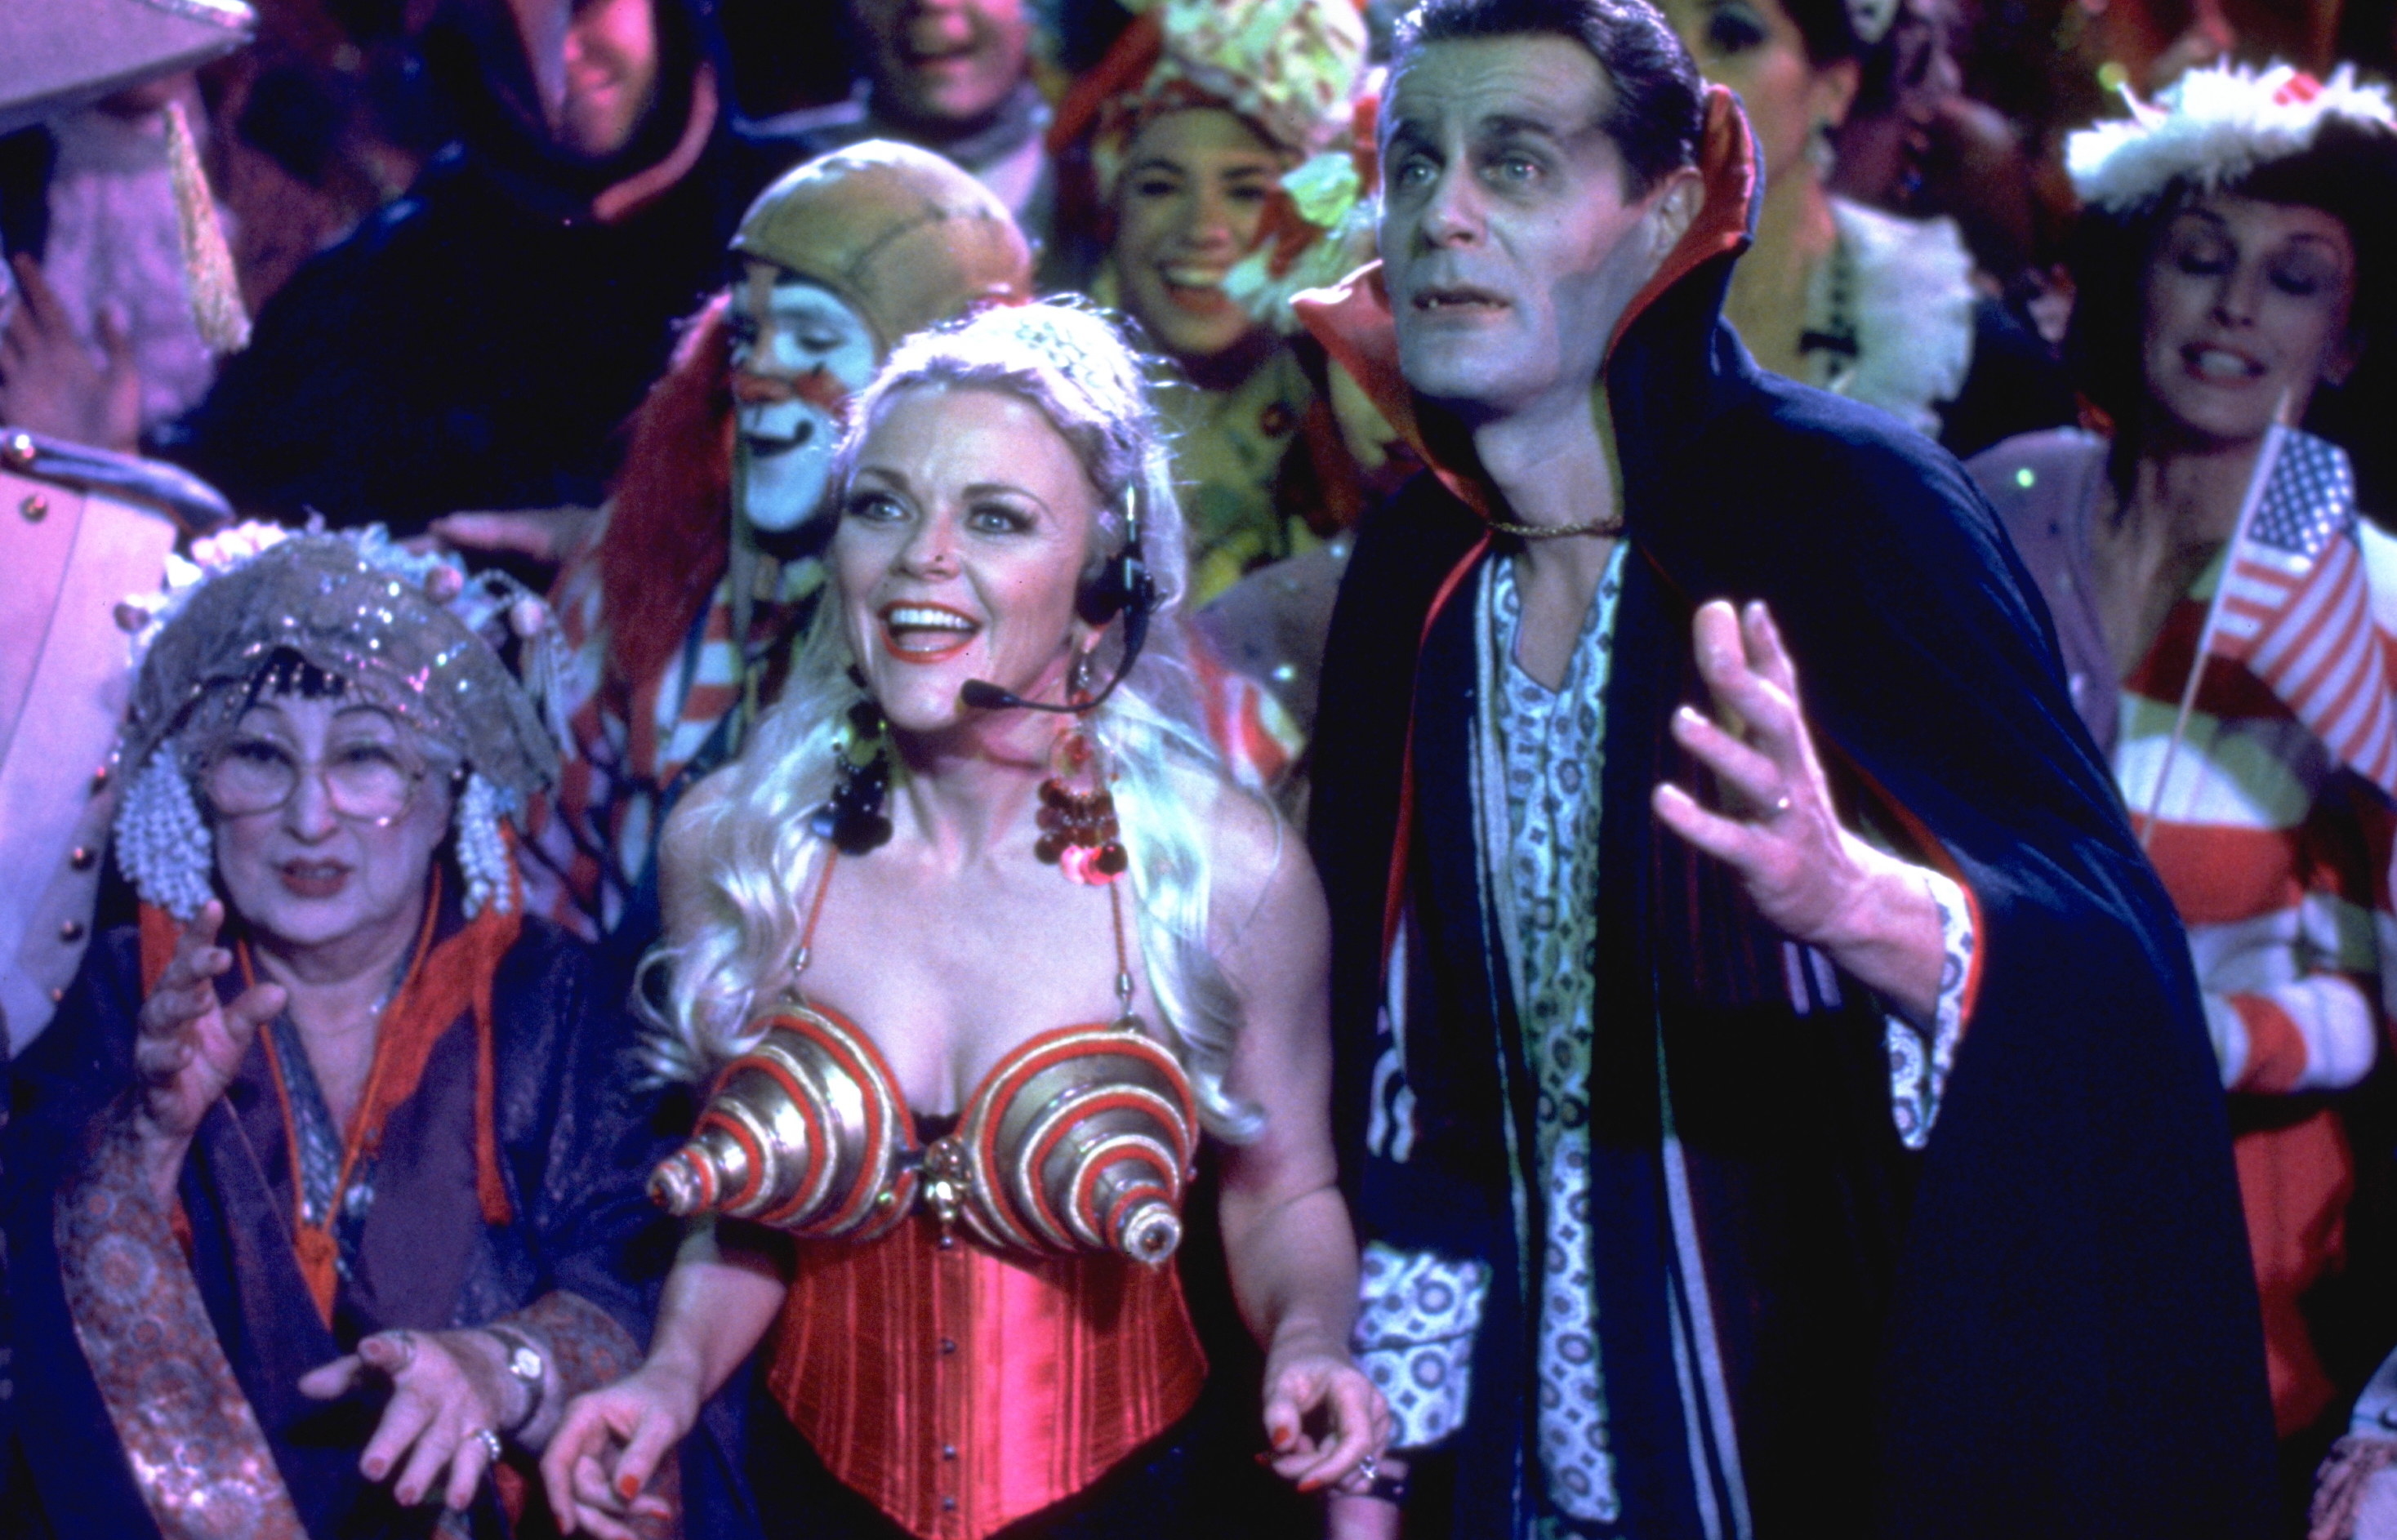 people dressed in costumes in the party scene